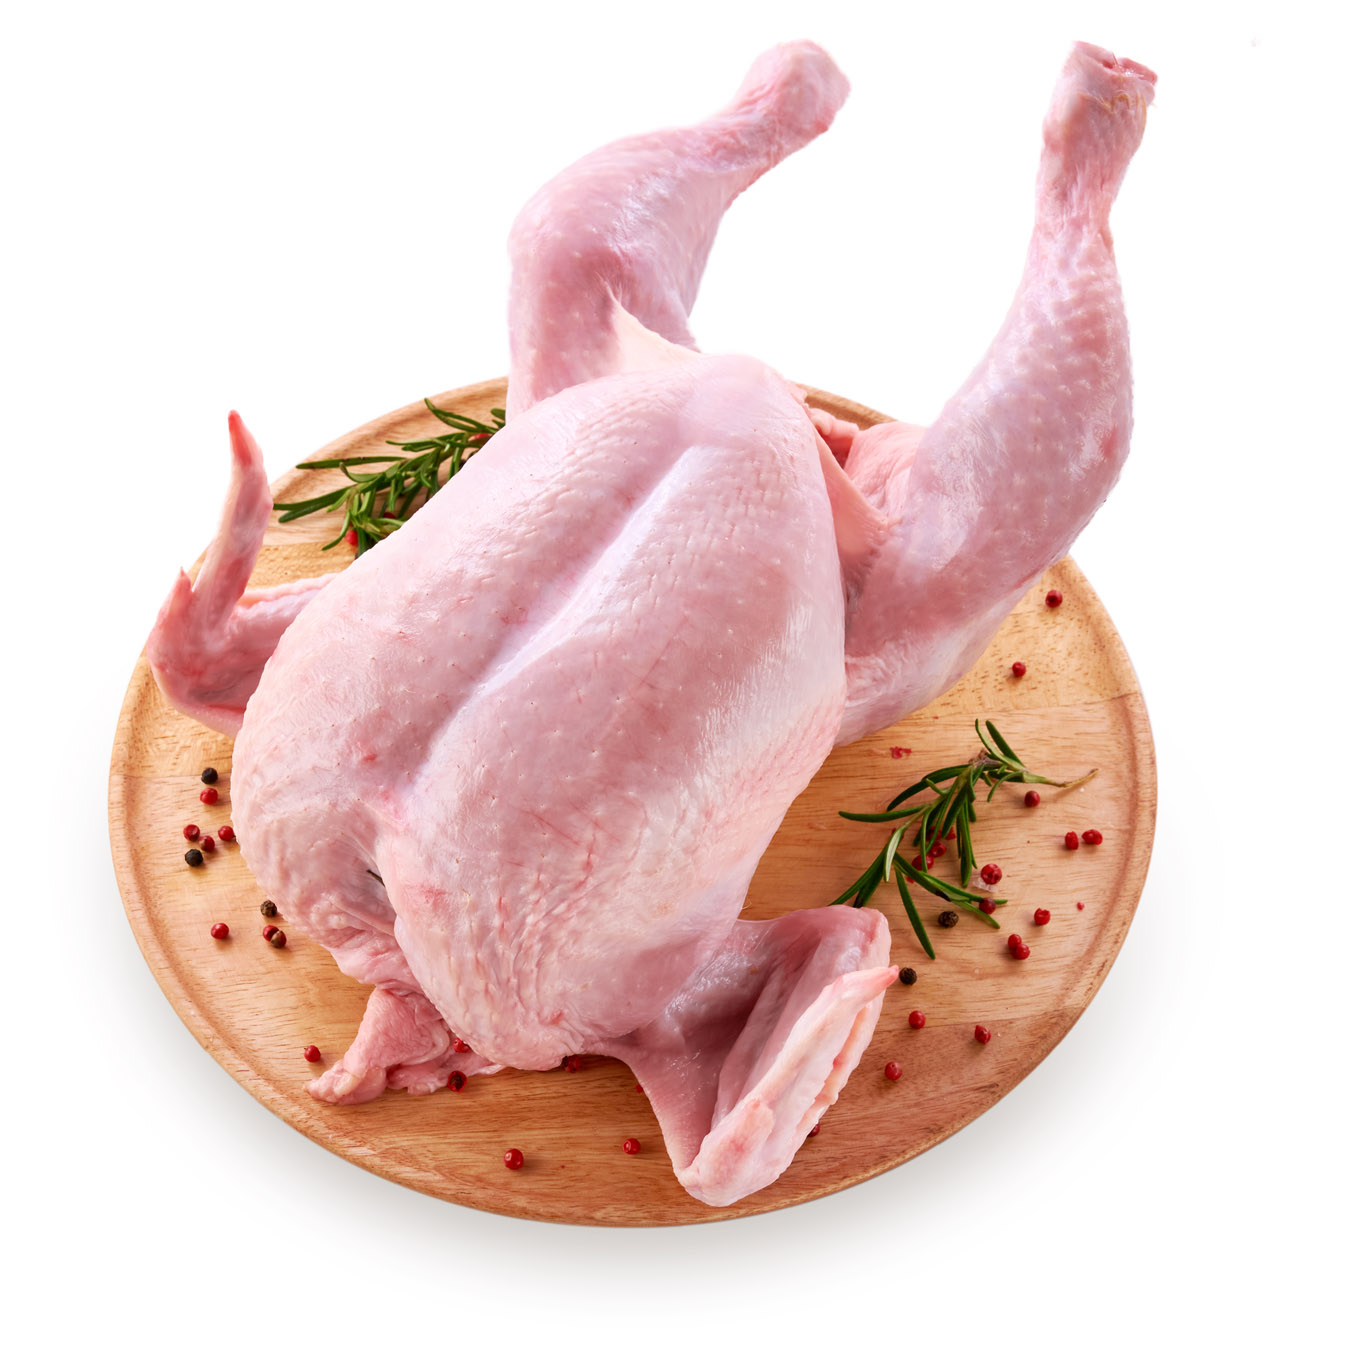 Broiler chicken carcass chilled